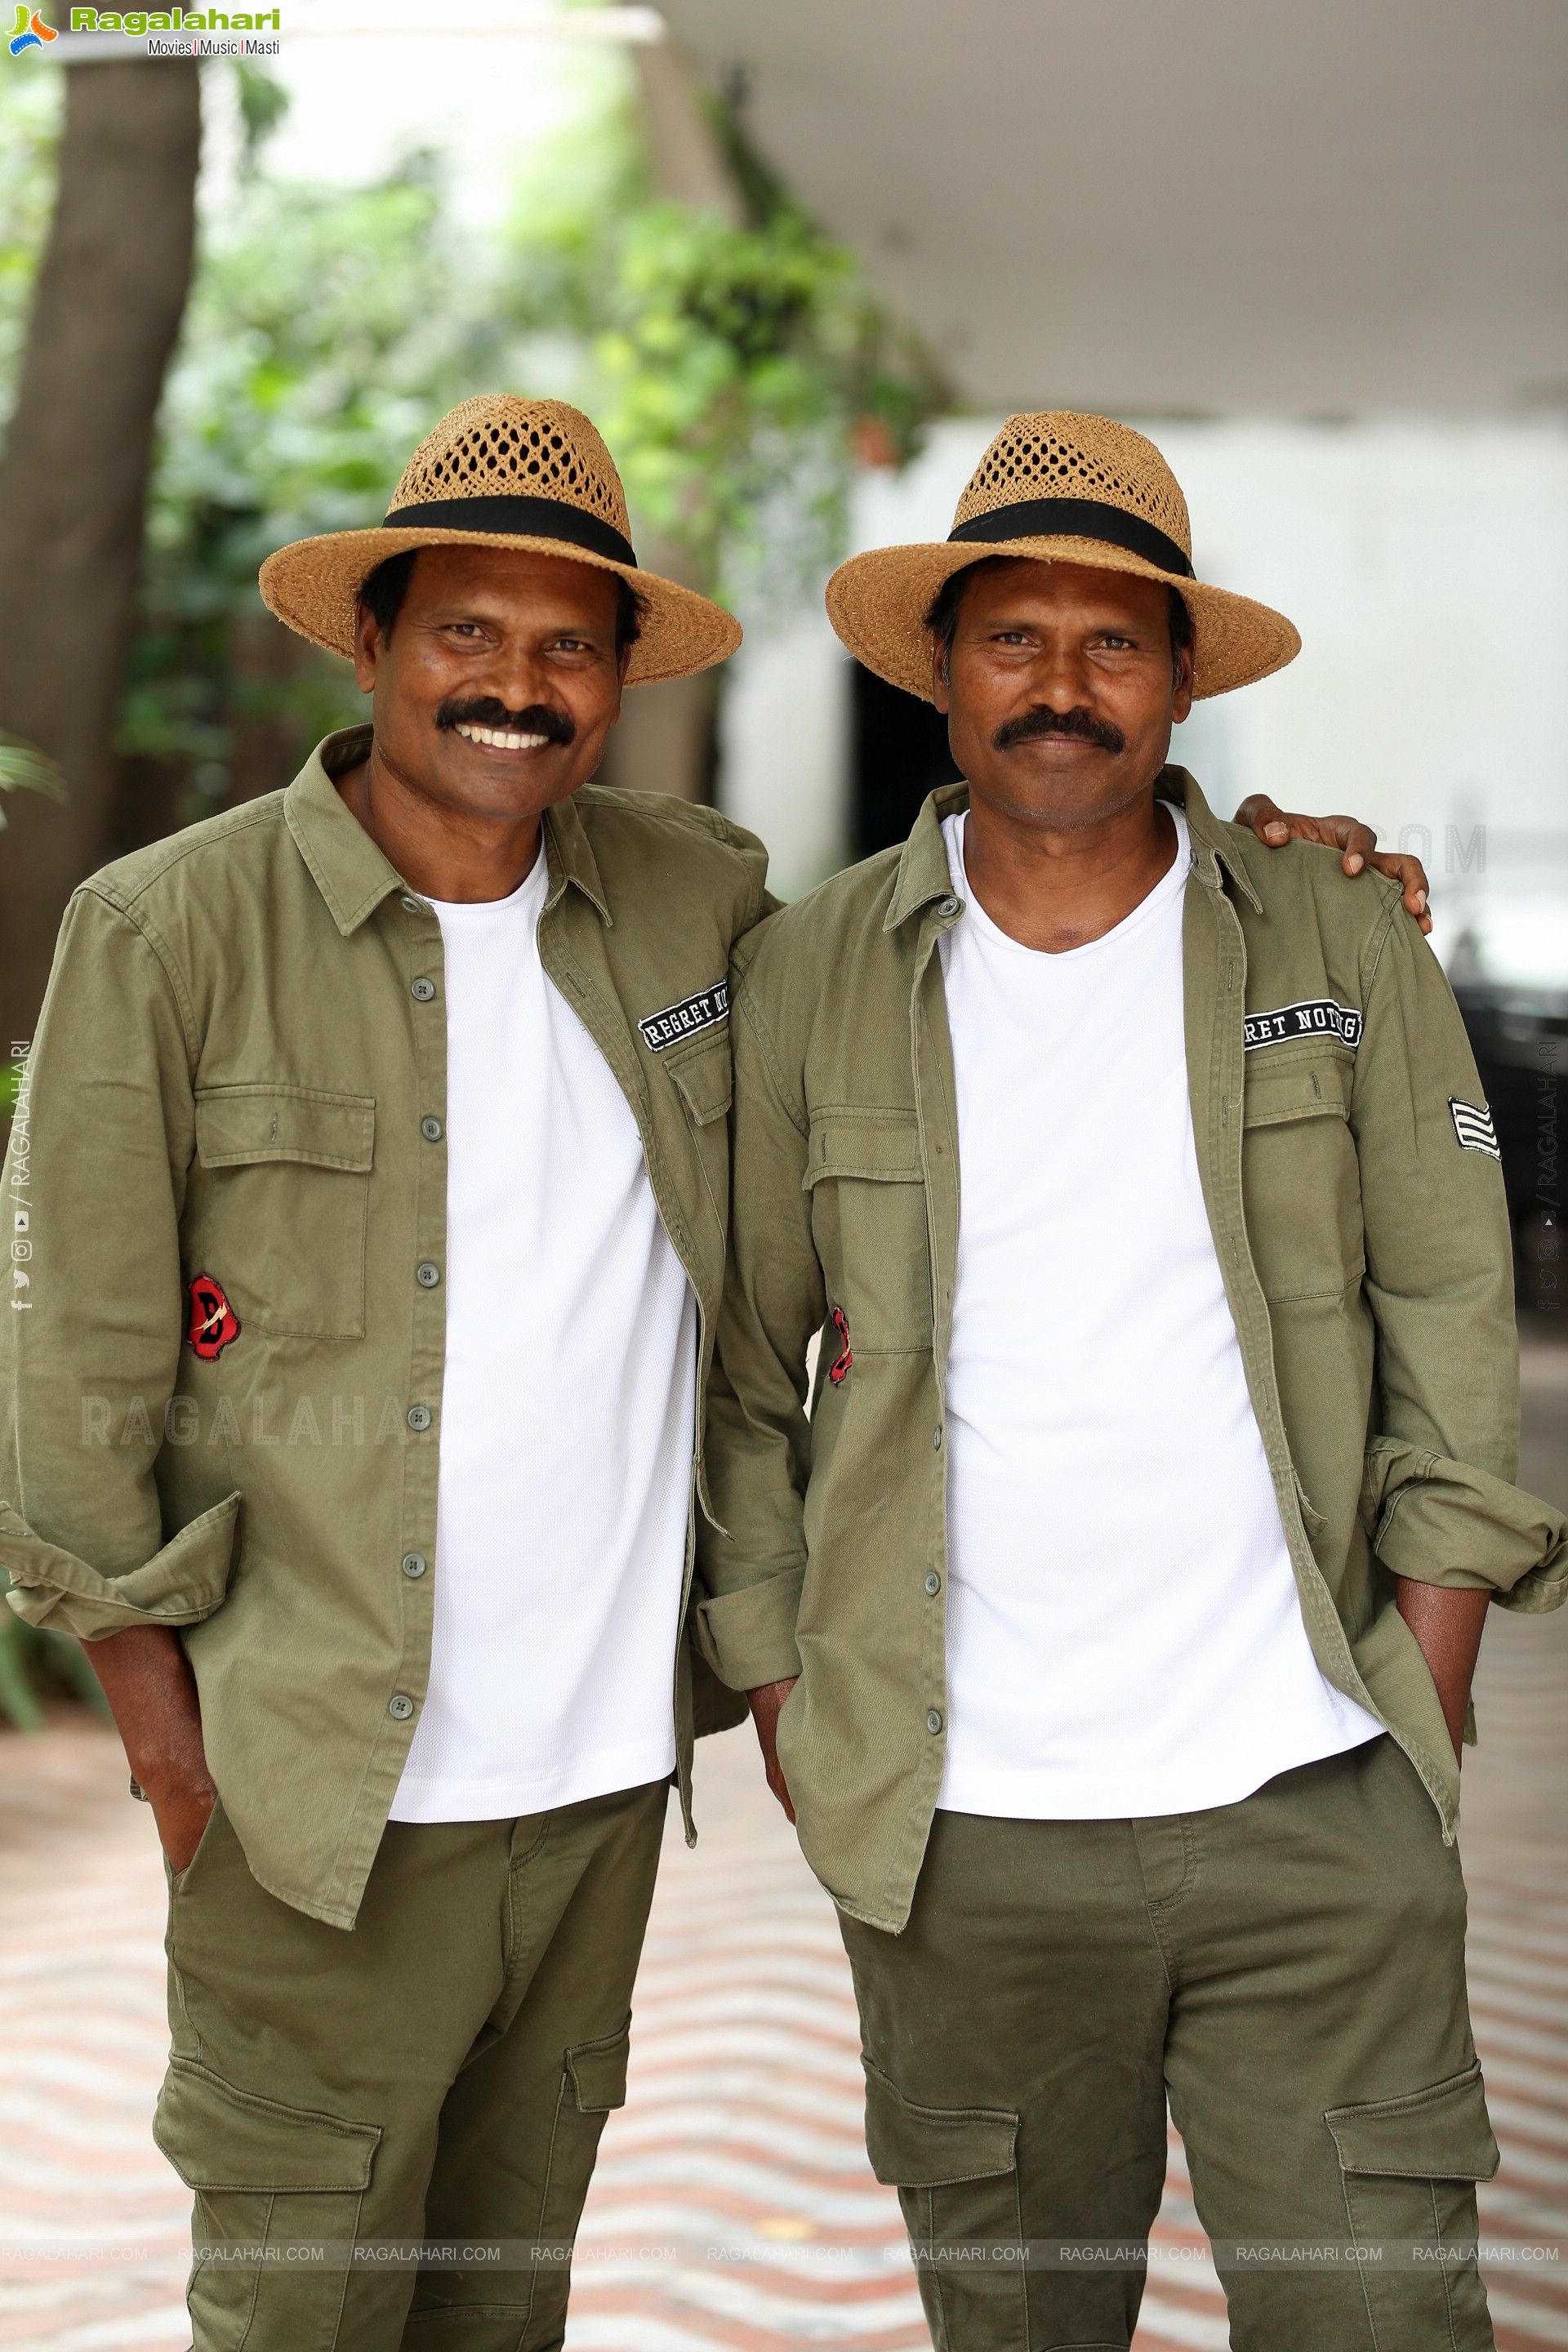 Ram-Lakshman Fight Masters at Tiger Nageswara Rao Interview, HD Gallery